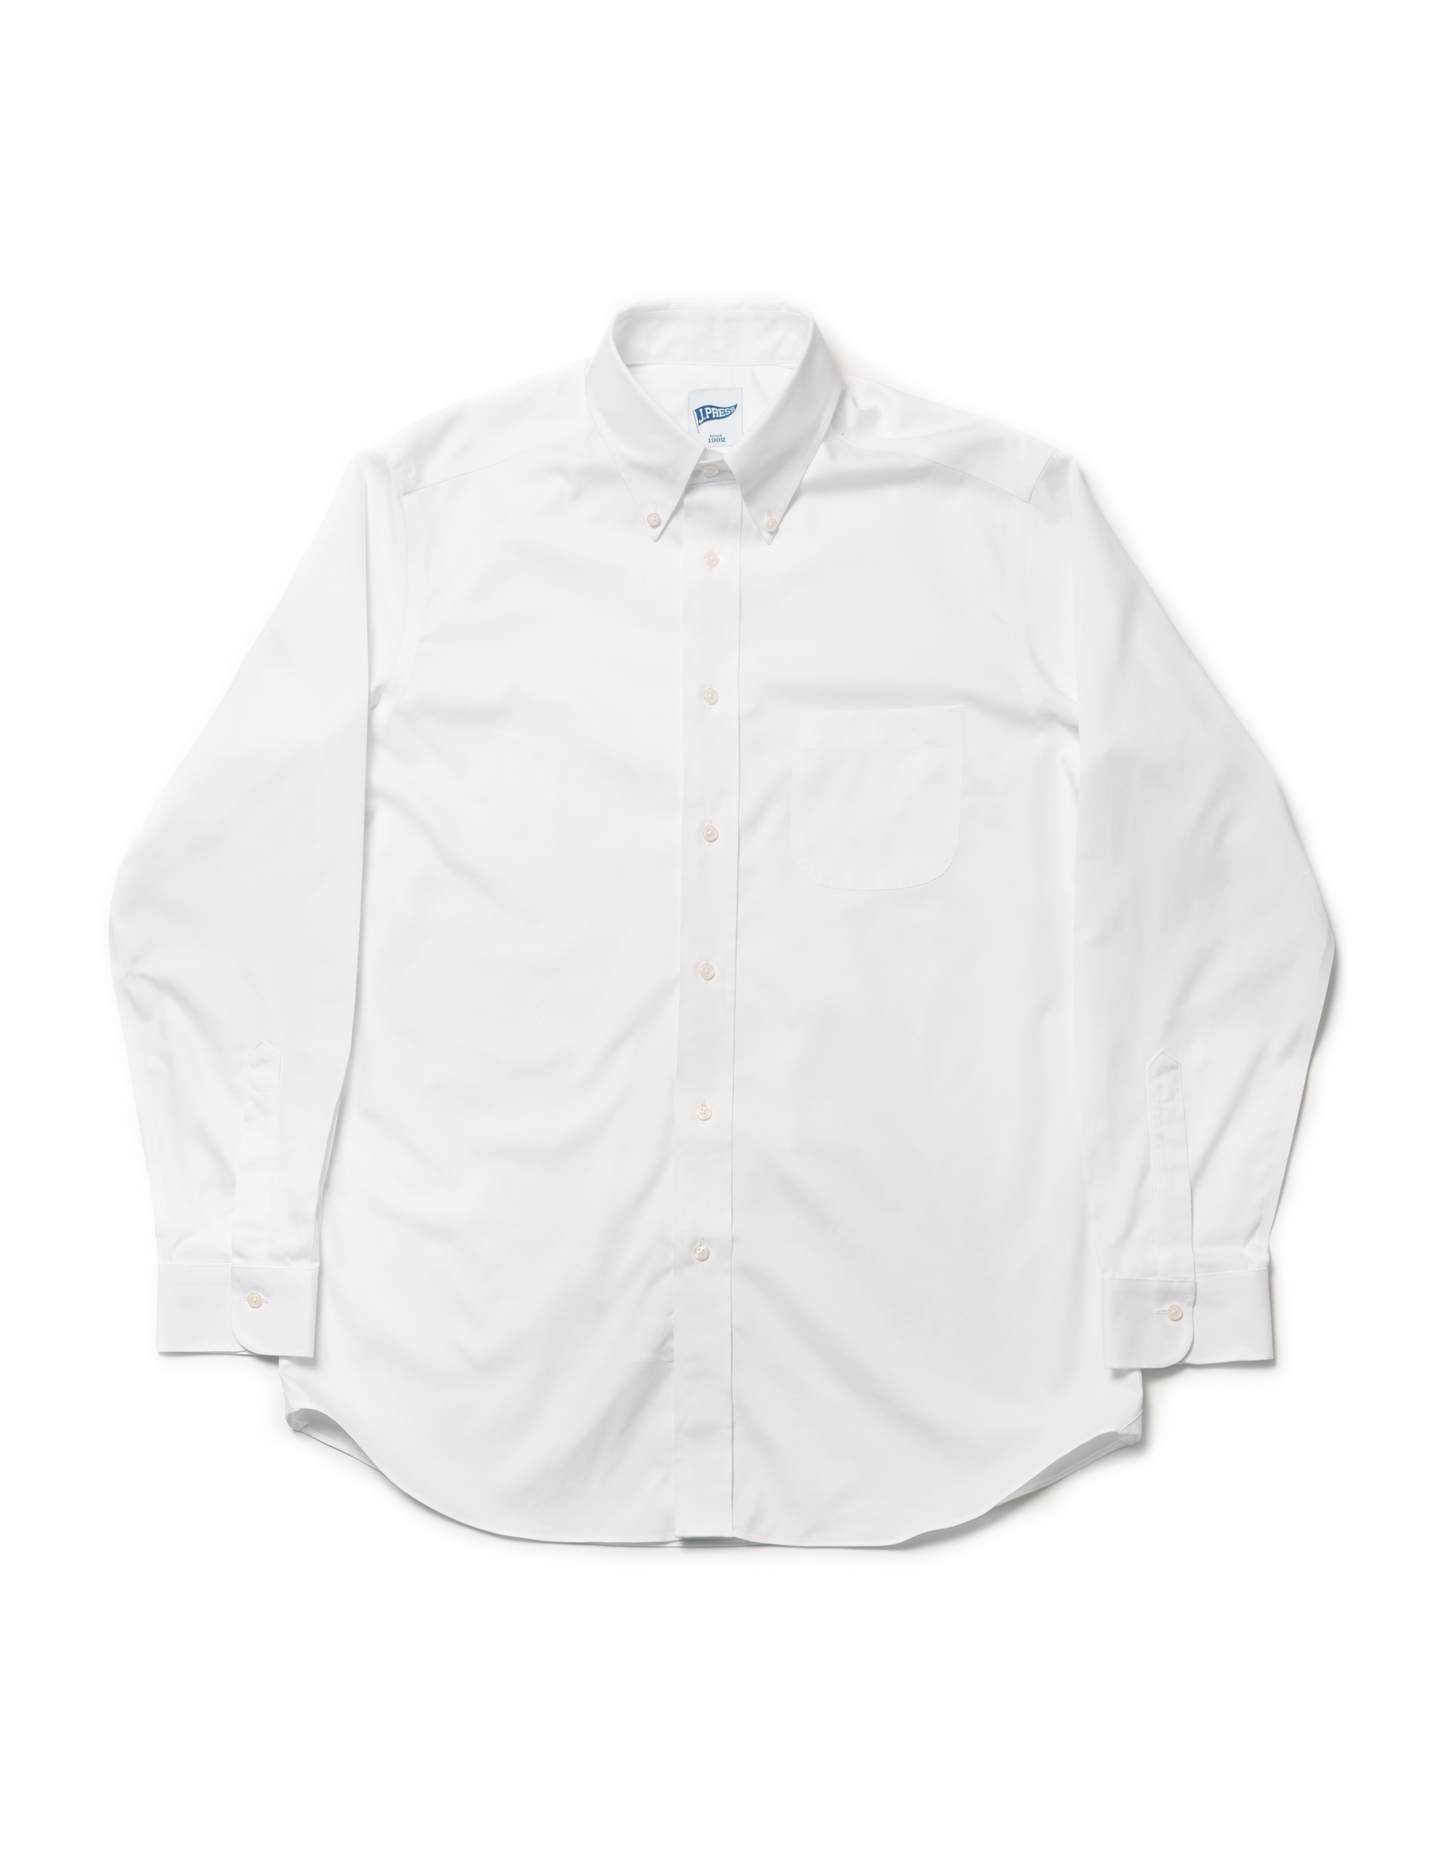 WHITE PINPOINT BUTTON DOWN COLLAR SHIRT - TRIM FIT